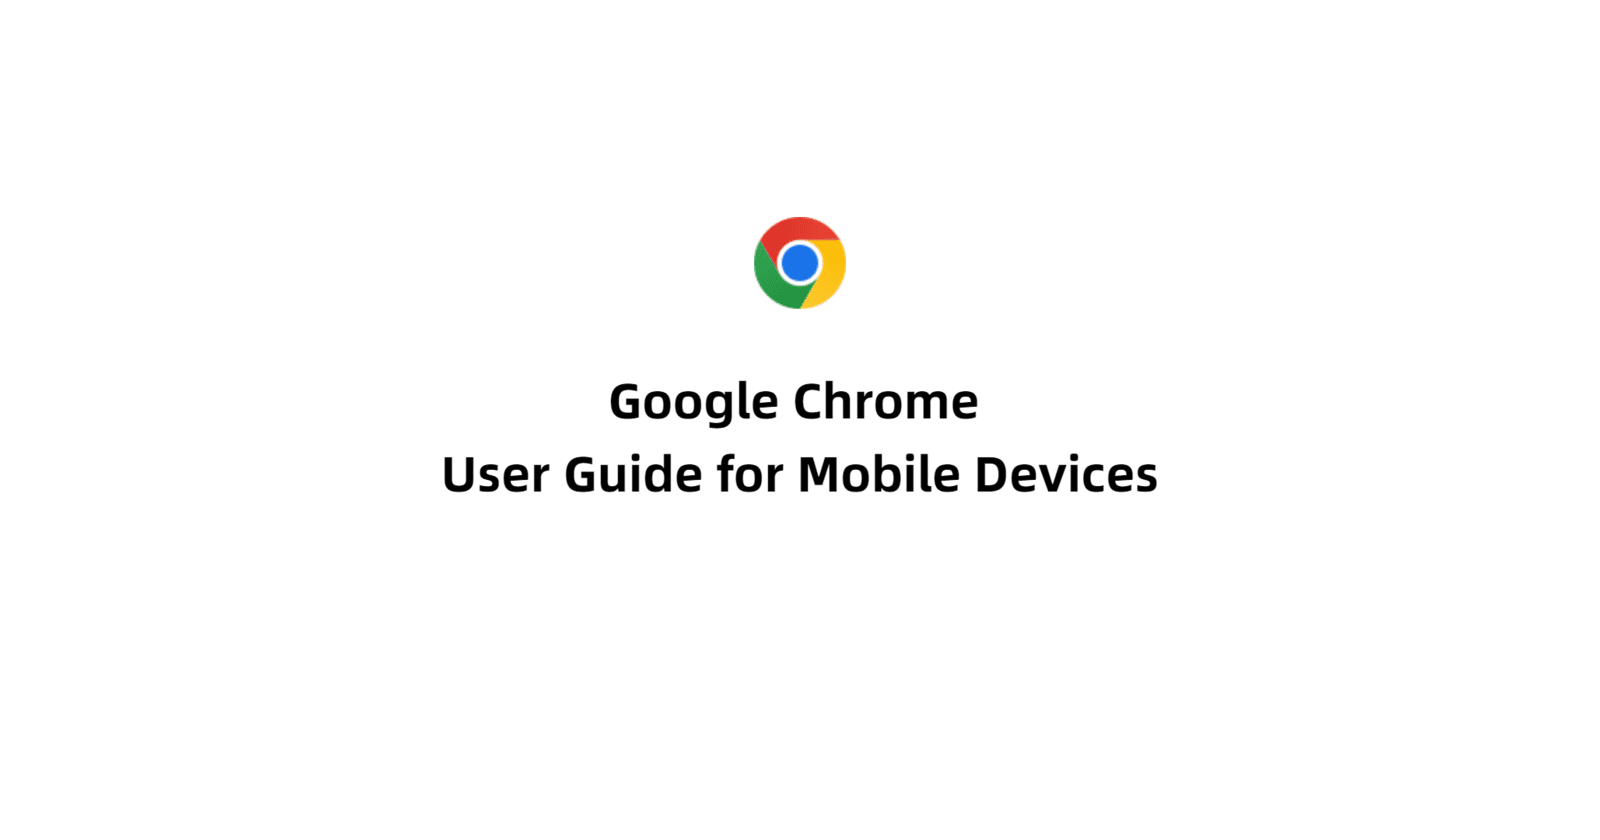 Google Chrome User Guide for Mobile Devices